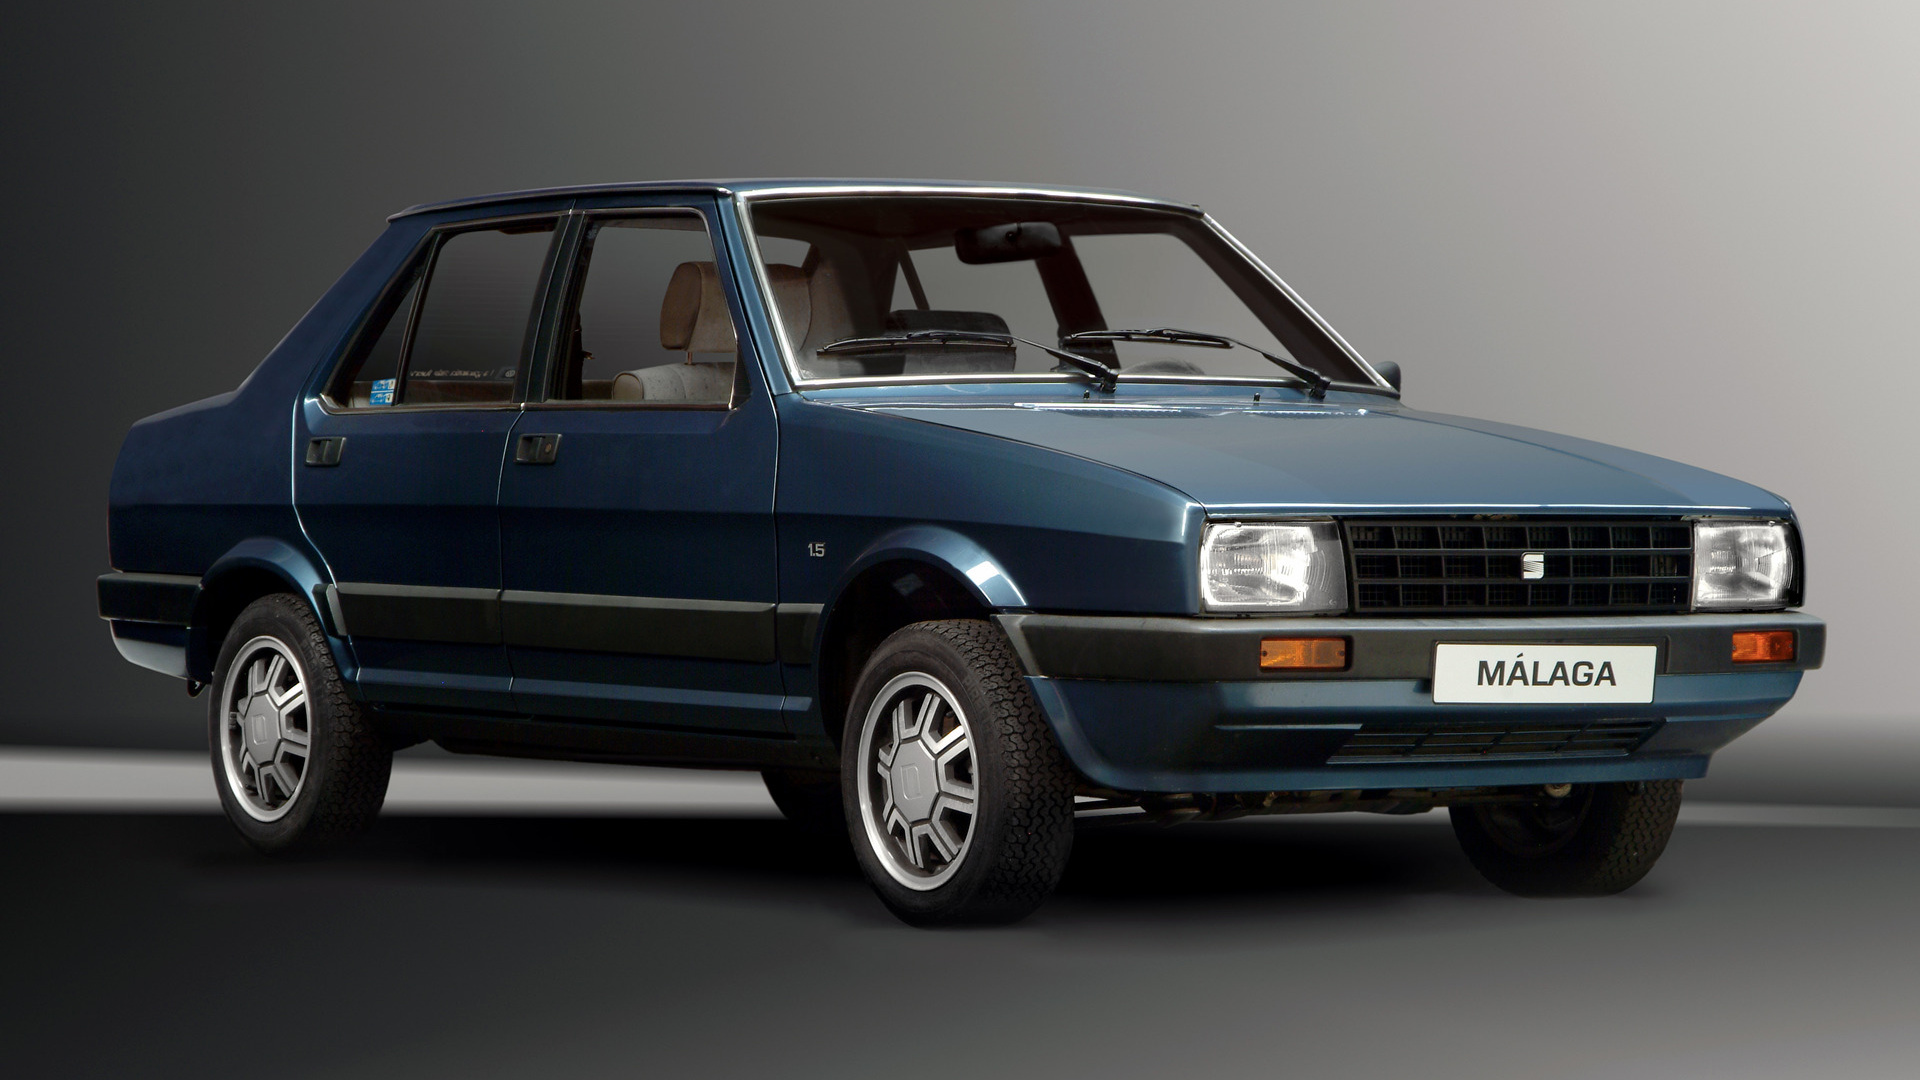 1984 Seat Malaga - Wallpapers and HD Images | Car Pixel